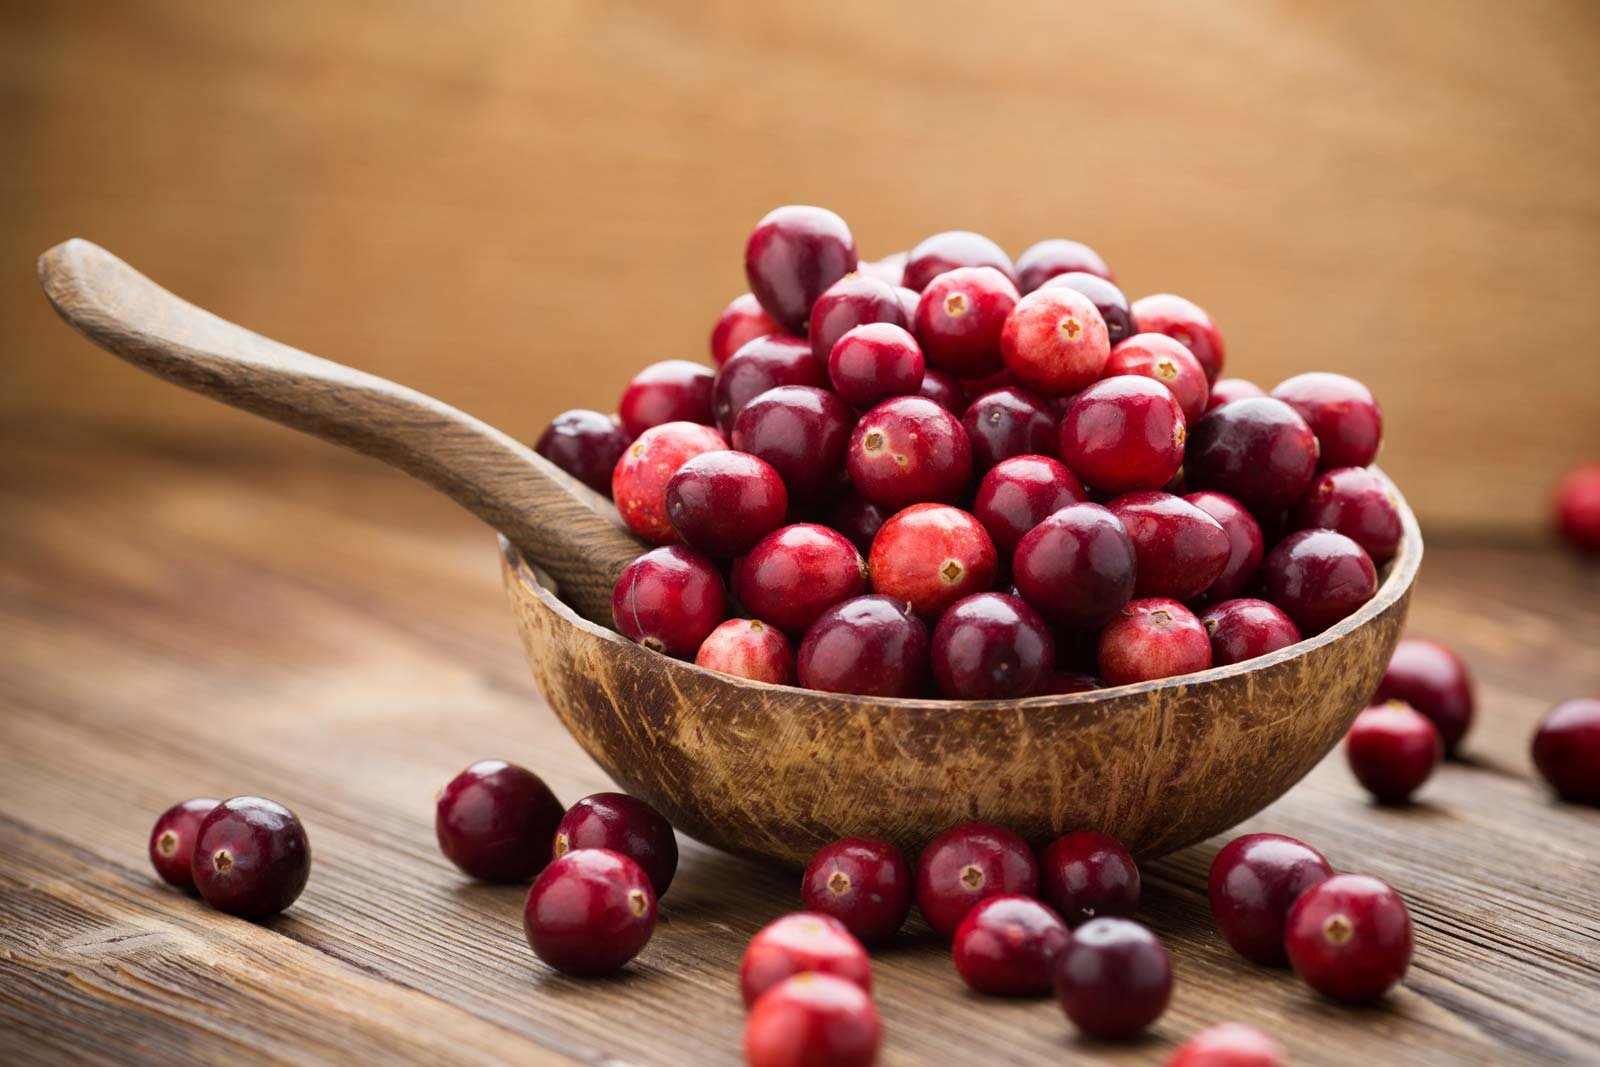 daily-consumption-of-cranberries-may-improve-cardiovascular-function-study